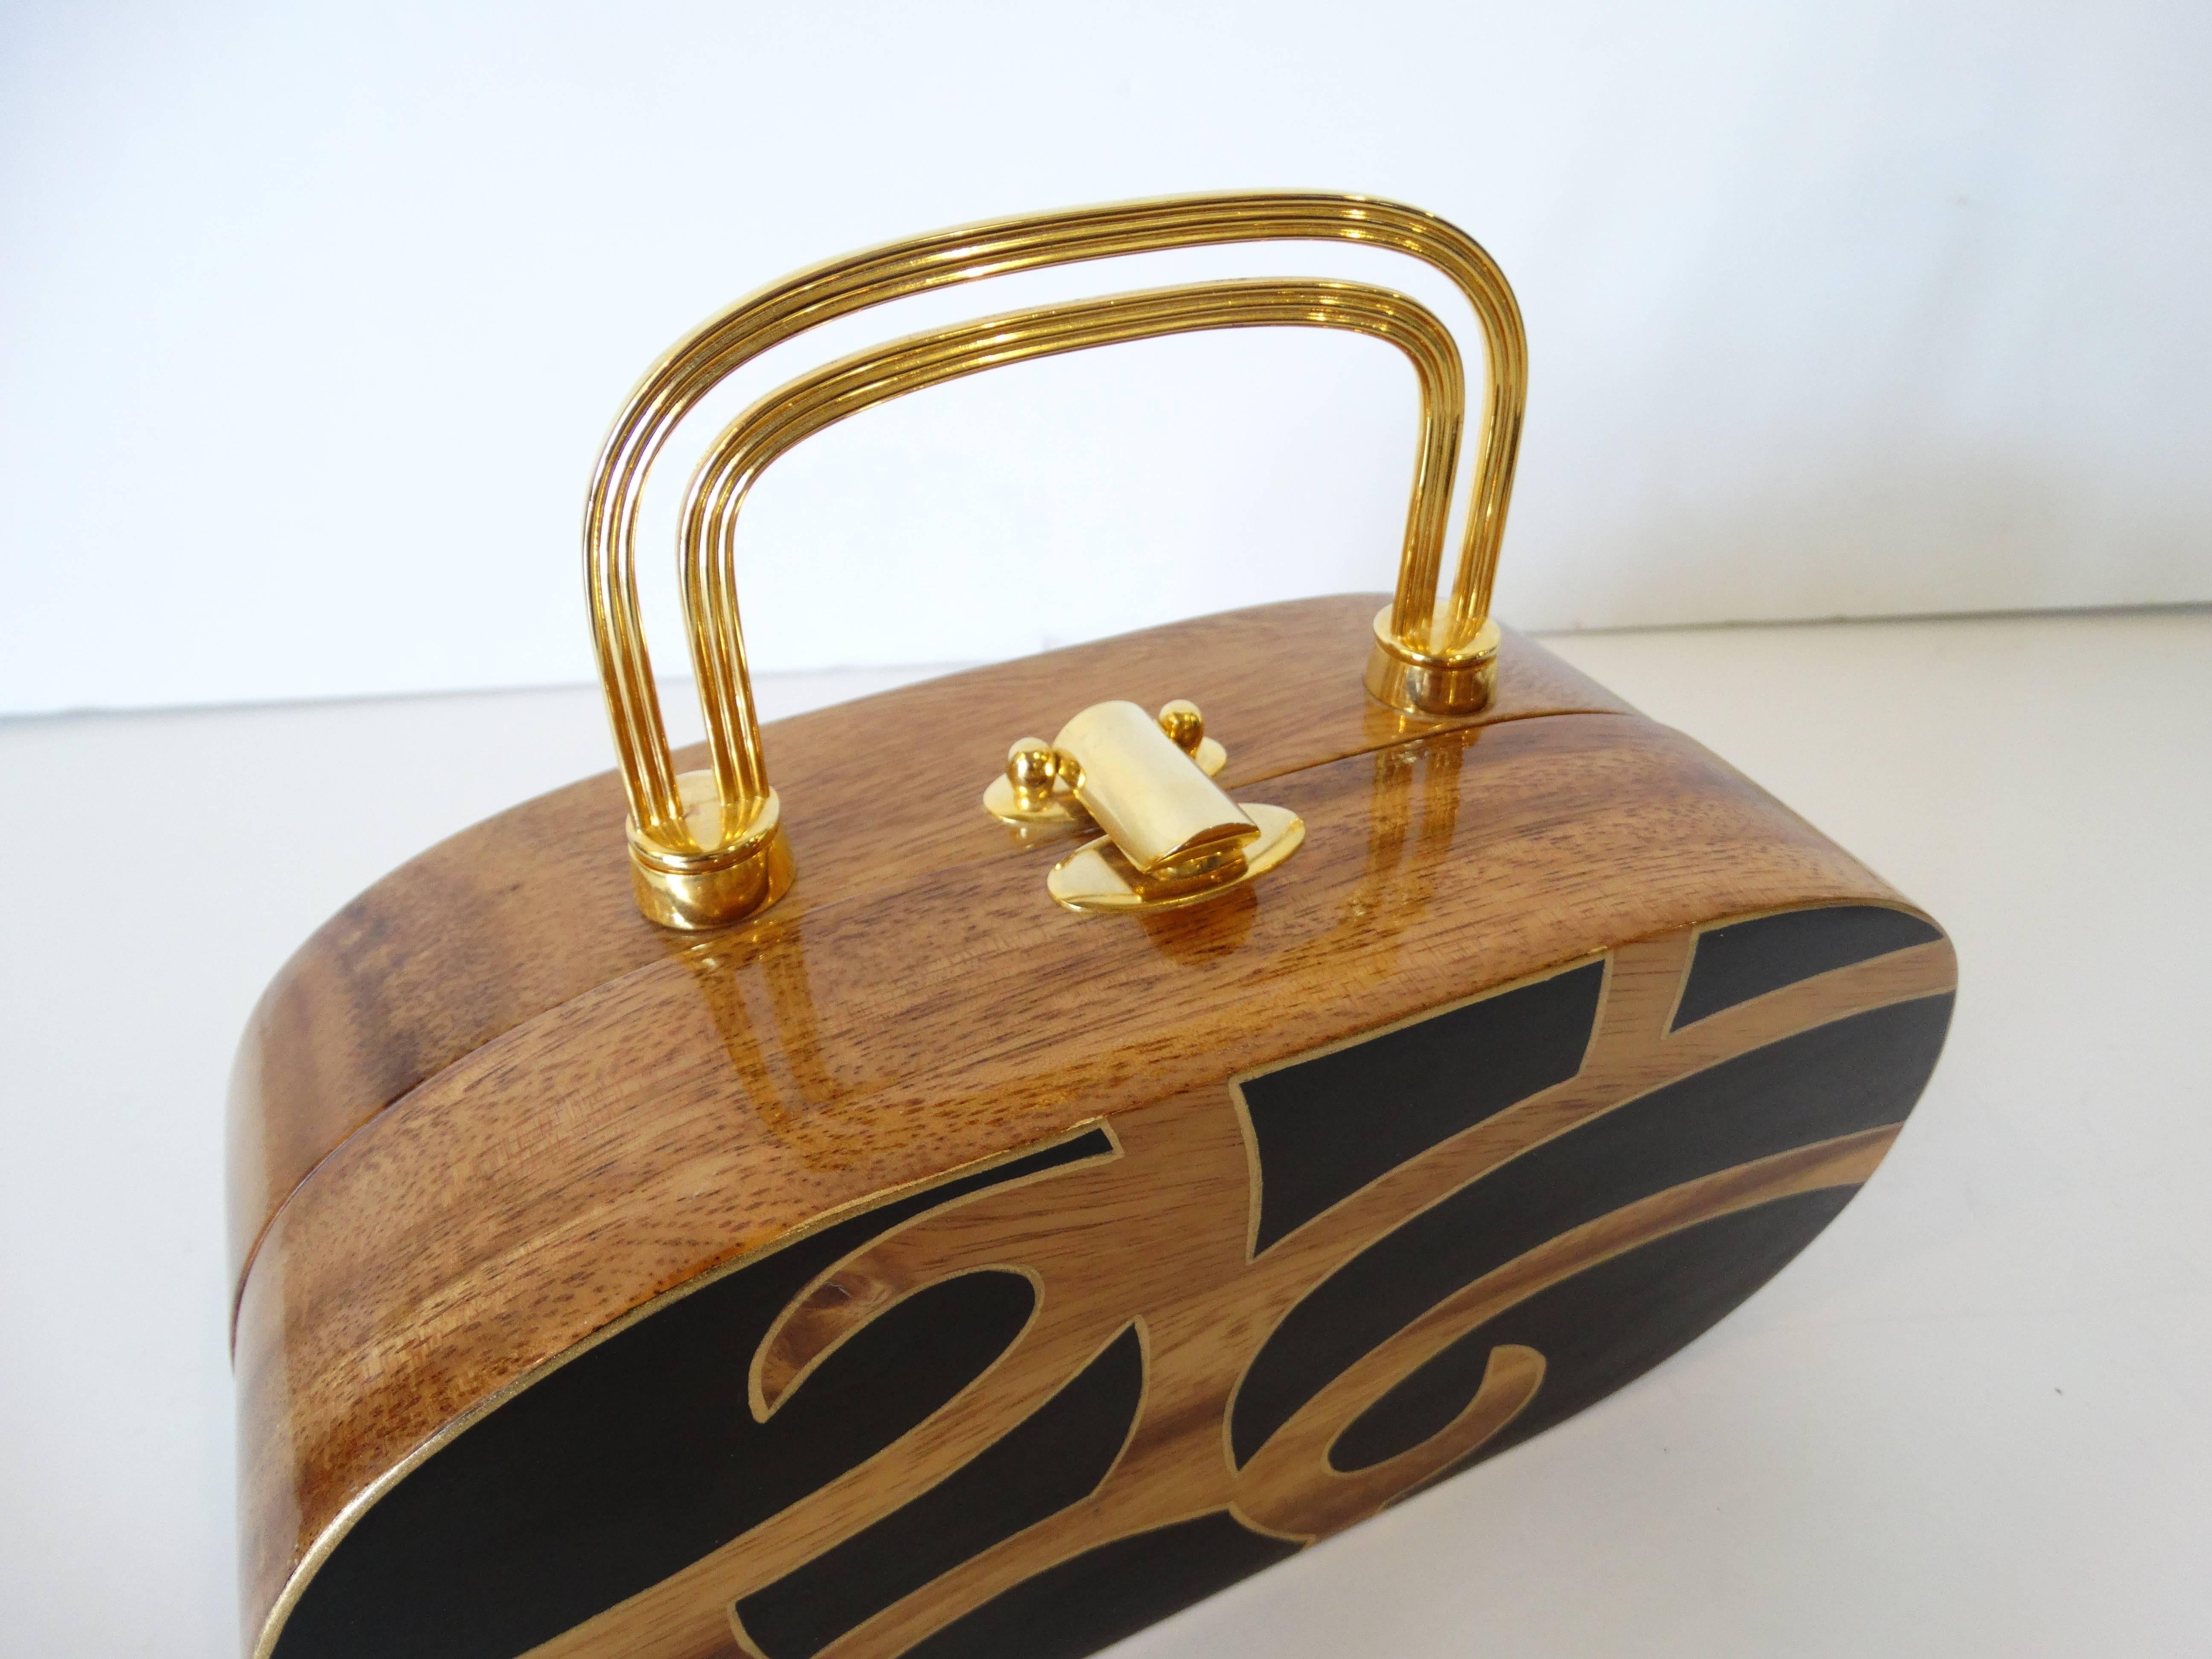 Timmy Woods Lacquered Wood Handbag 1